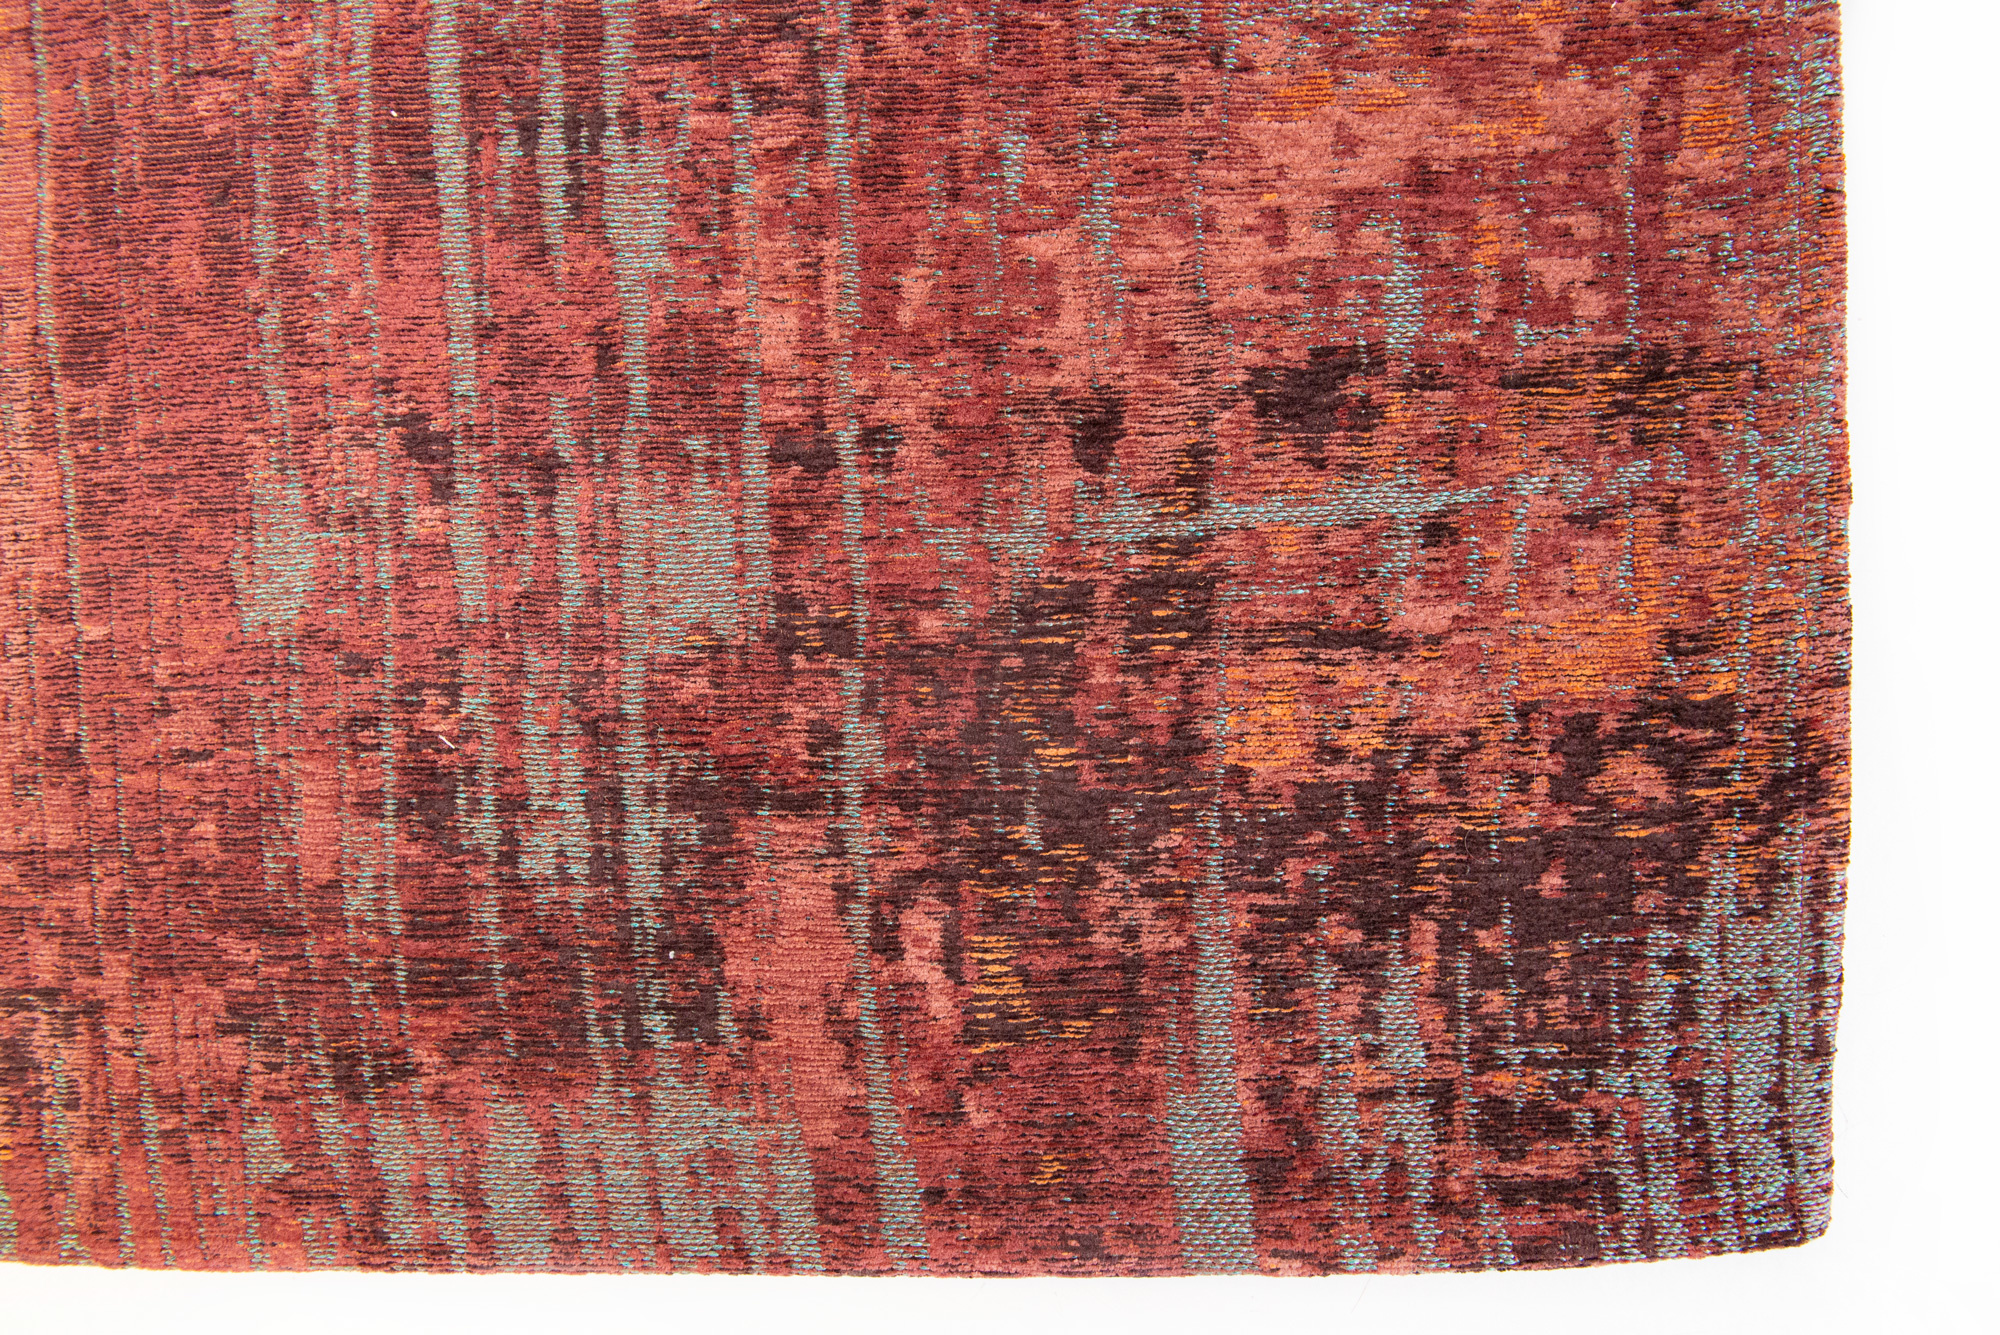 Abstract Flatwoven Red Rug ☞ Size: 9' 2" x 13' (280 x 390 cm)